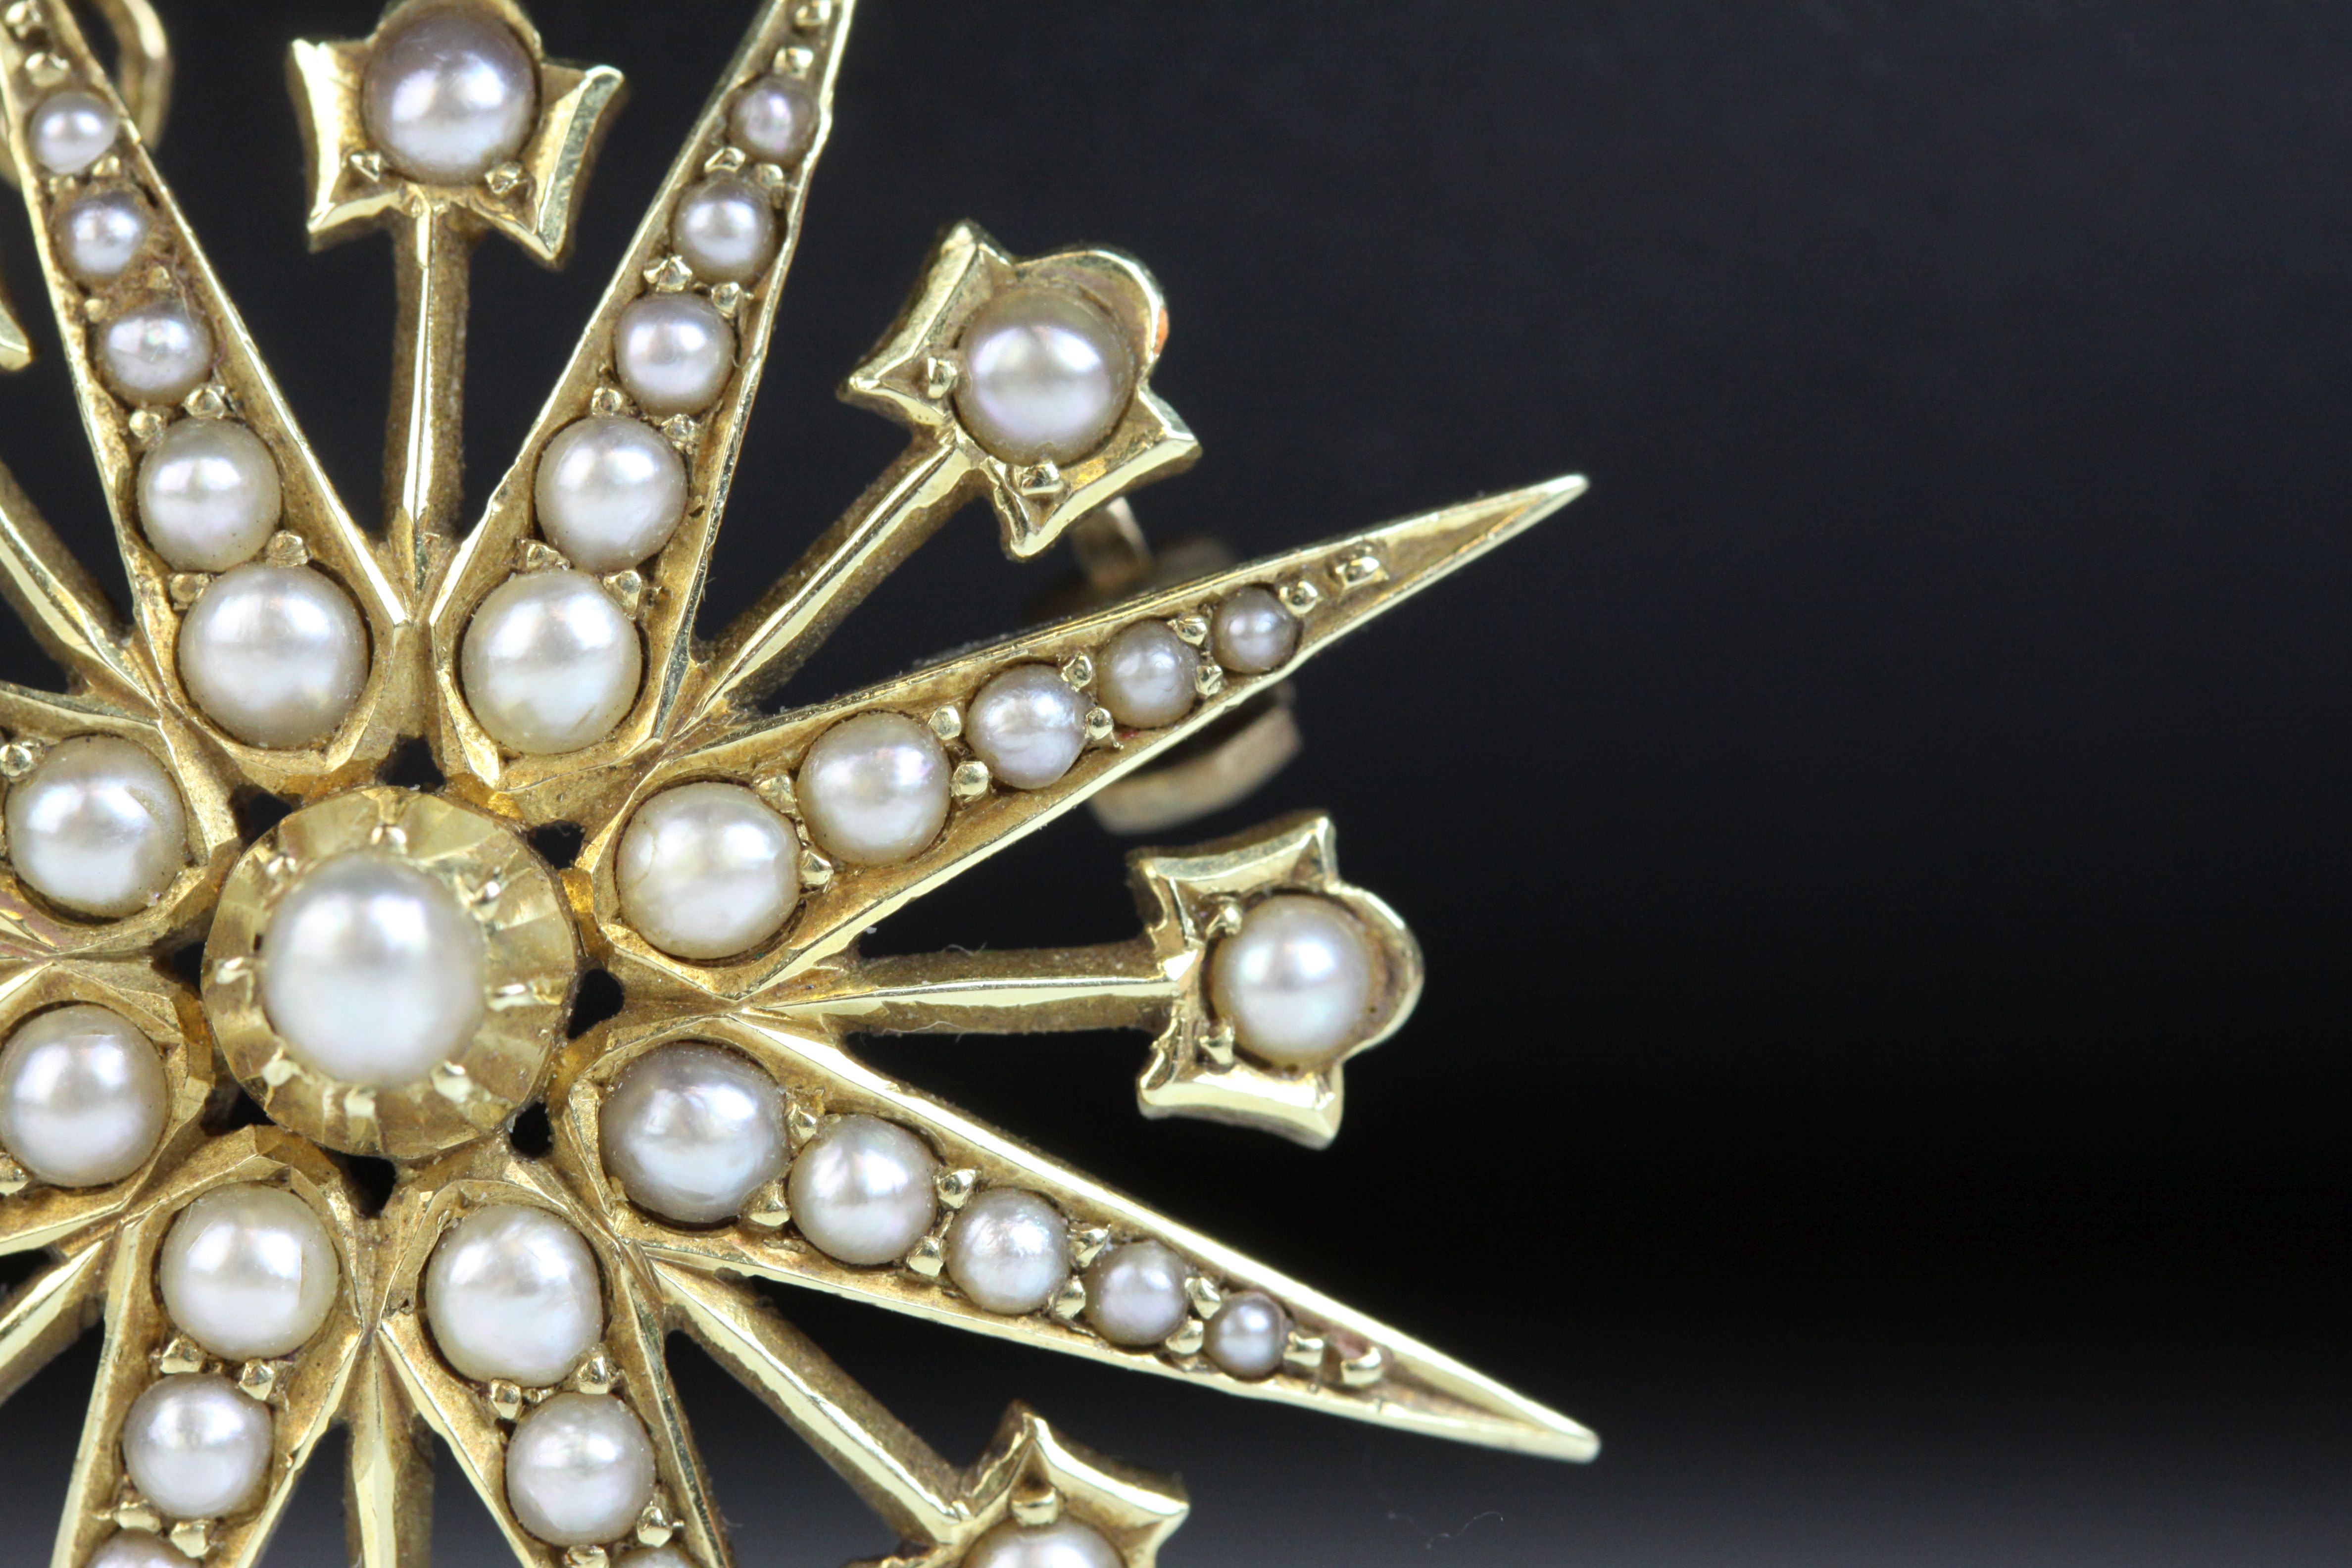 Edwardian seed pearl 15ct yellow gold pendant brooch, eight pronged star full set with graduated - Image 5 of 6